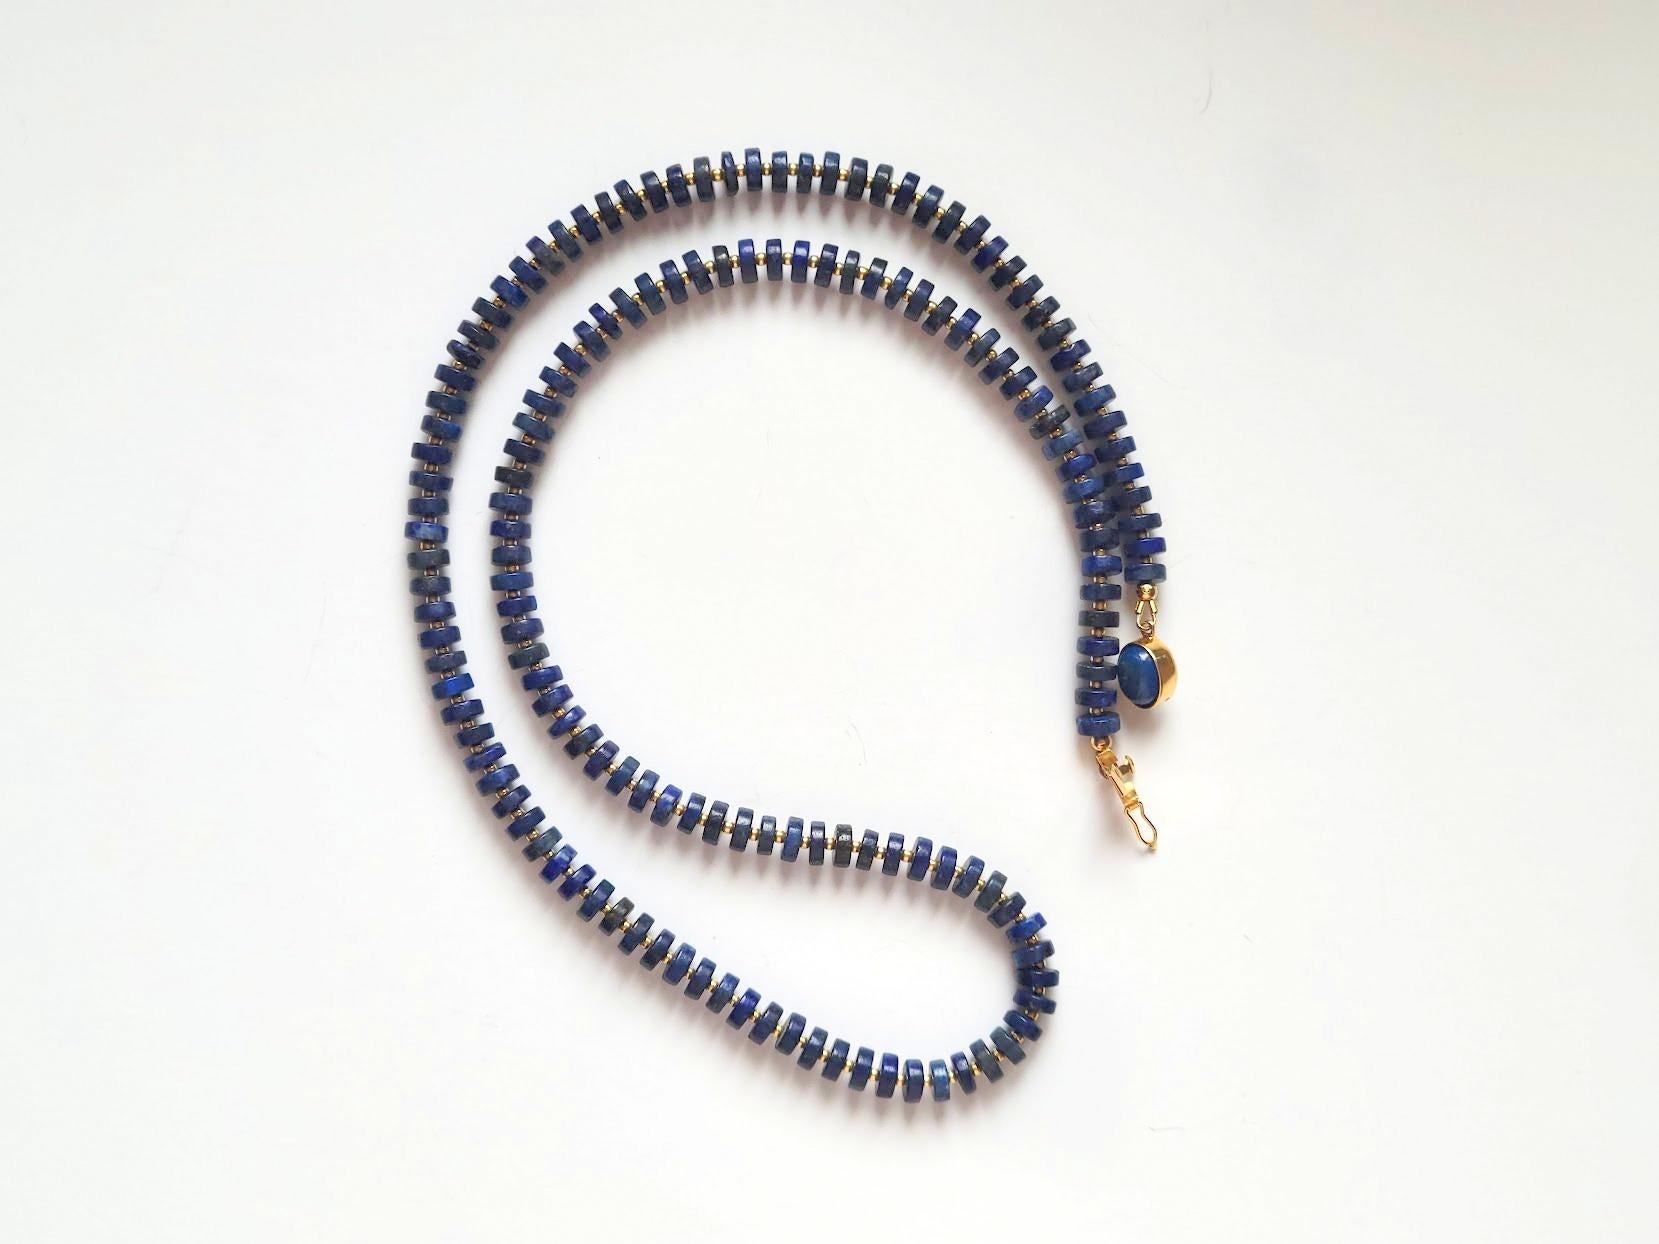 The length of the necklace is 26 inches ( 66 cm). The size of the rondelle beads is 7 mm.
The necklace is made of gems in saturated, deep, dark blue with inclusions of gold pyrite.
Authentic, natural color. No thermal or other mechanical treatments